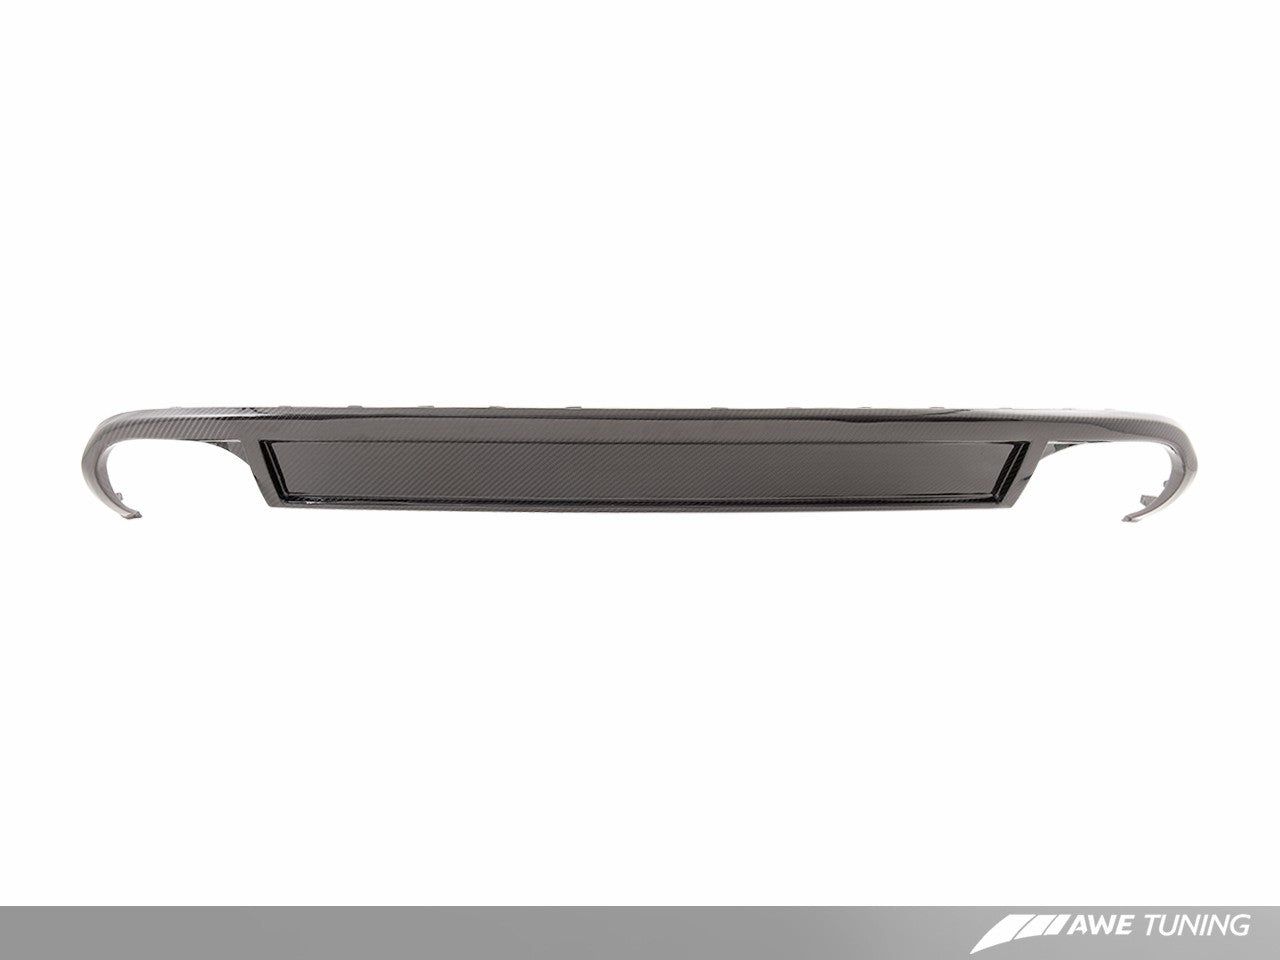 AWE Carbon Fiber Quad Tip Valance Conversion Kit for B8 A4 - Non S-Line Cars (Heat shield and hardware included)